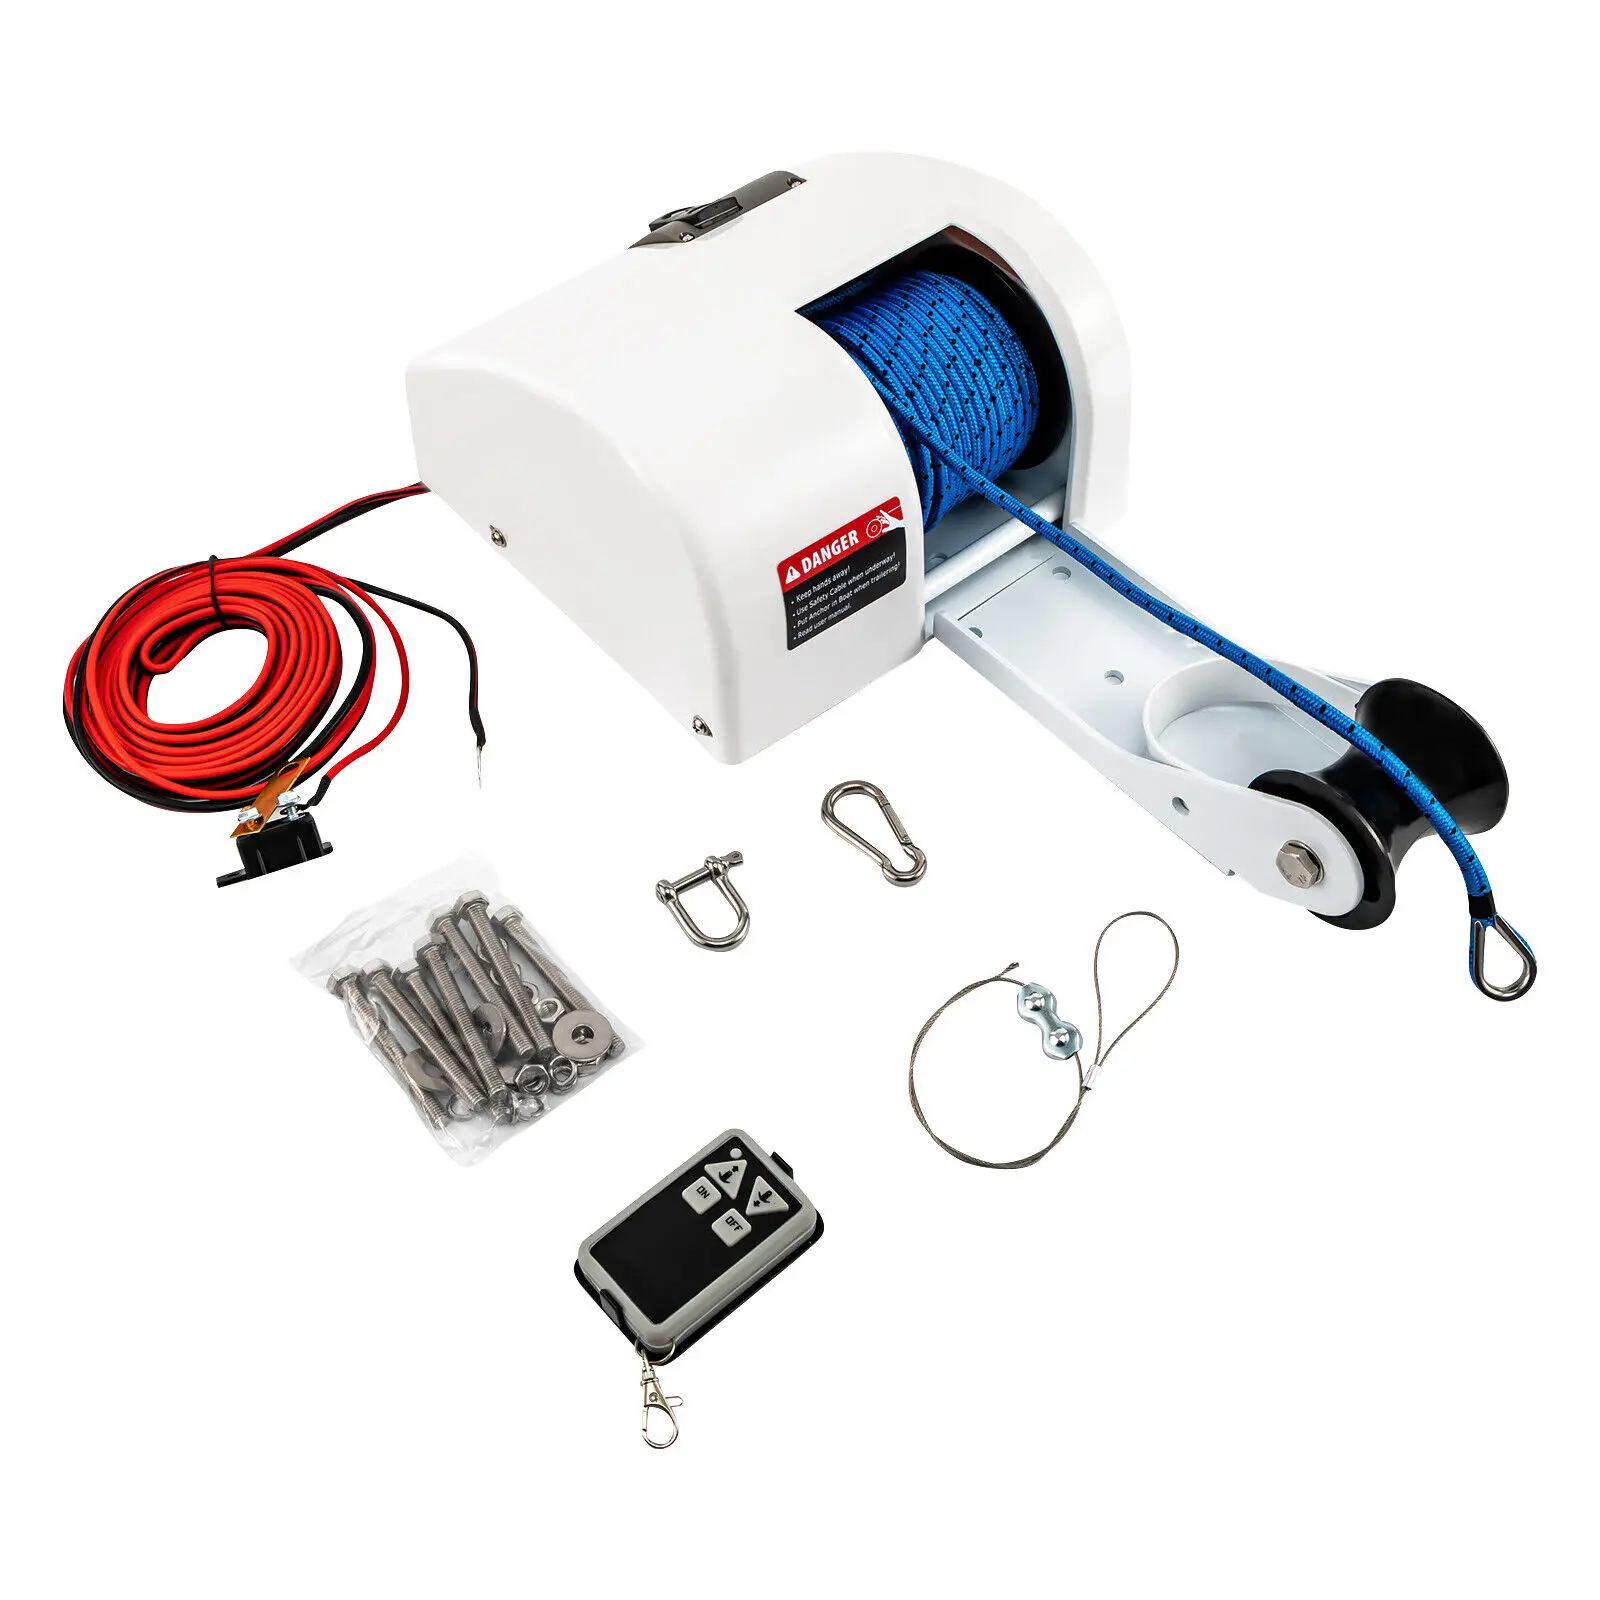 

Boat Anchor Winch Marine Saltwater Electric Windlass Anchor With Wireless Remote Control Kit 25 LBS 12V